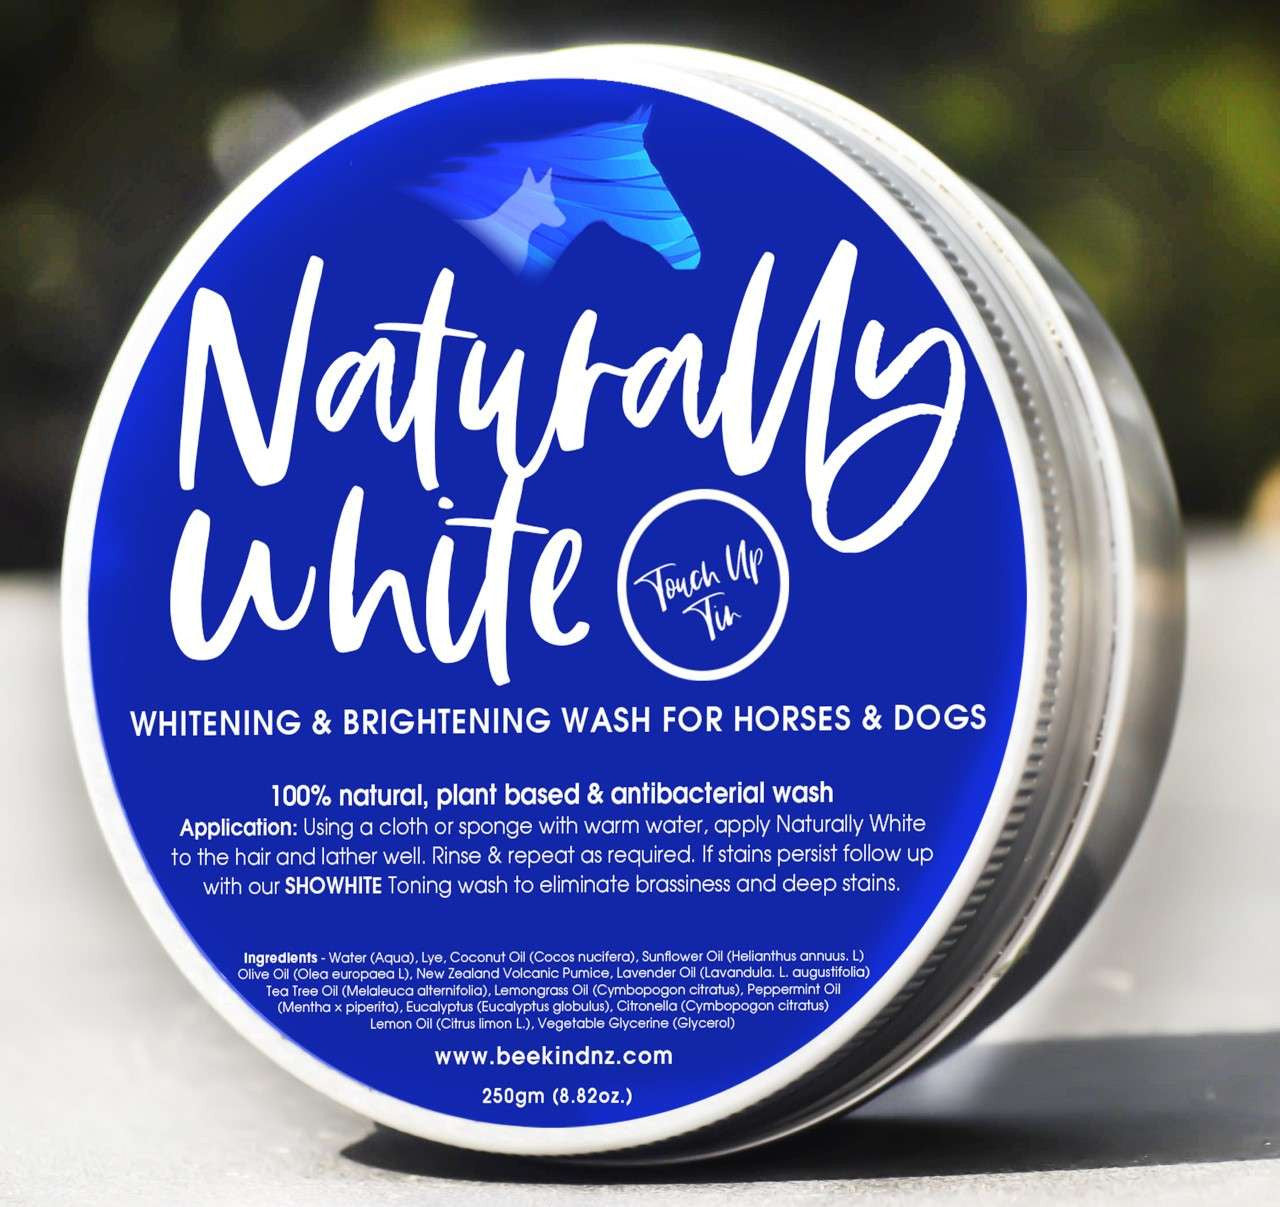 NATURALLY-WHITE-Soap-Wash-For-Horses-Hounds-Touch-up-Tin_1519__60093_1.jpg